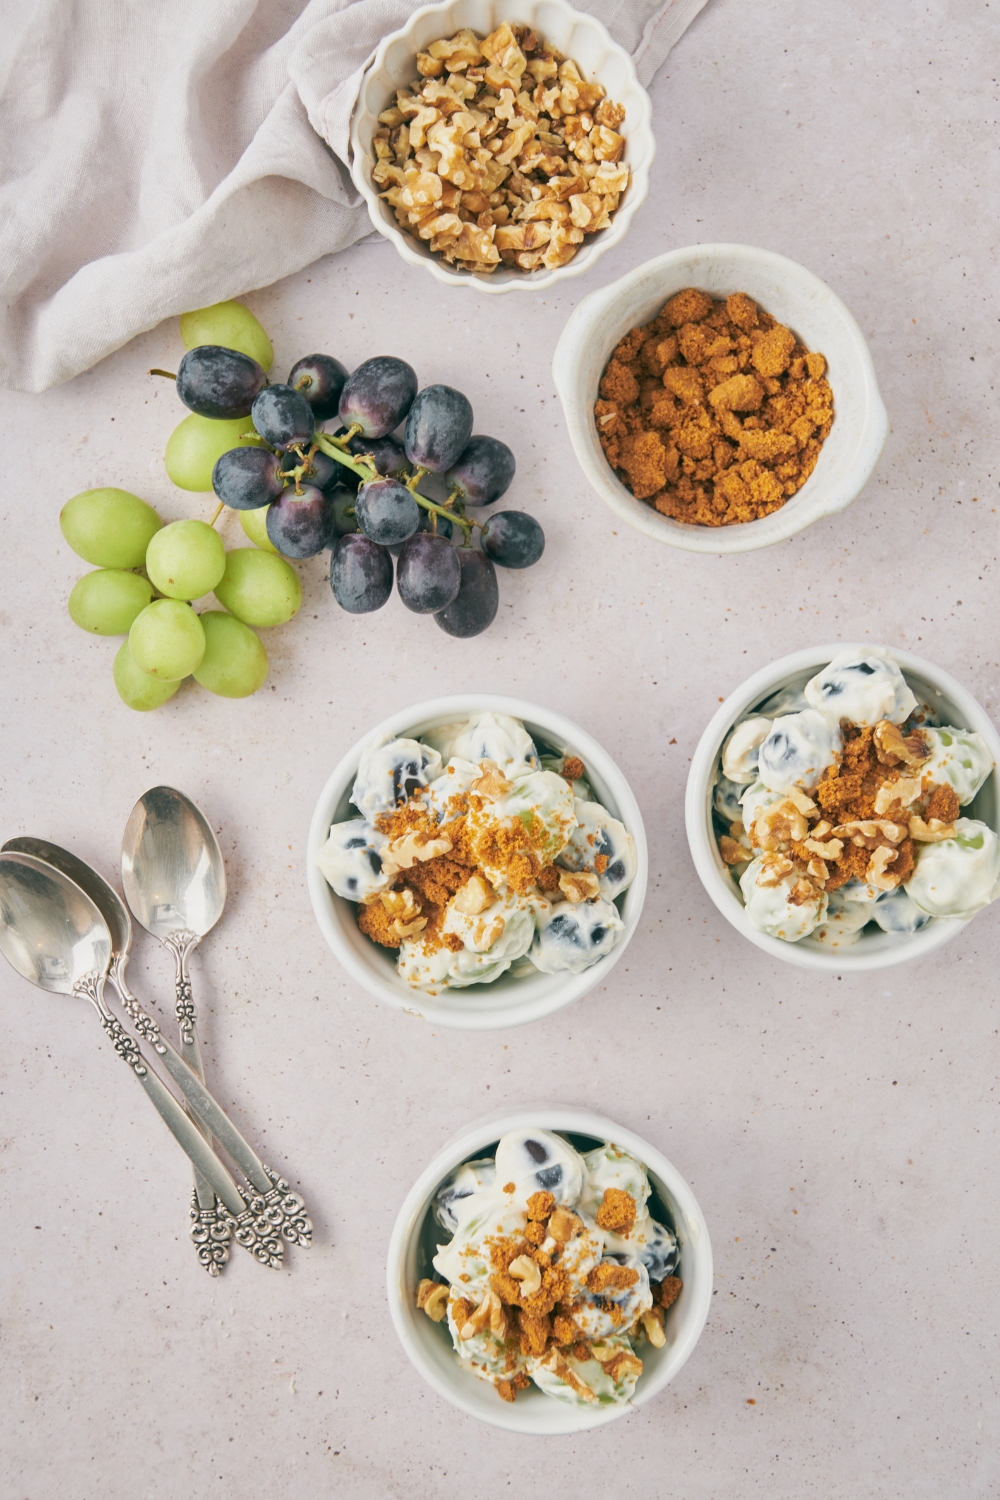 Three bowls of grape salad, a vine of purple grapes, a vine of green grapes, a bowl of cookie crumbs, and a bowl of crushed walnuts all on a grey counter.